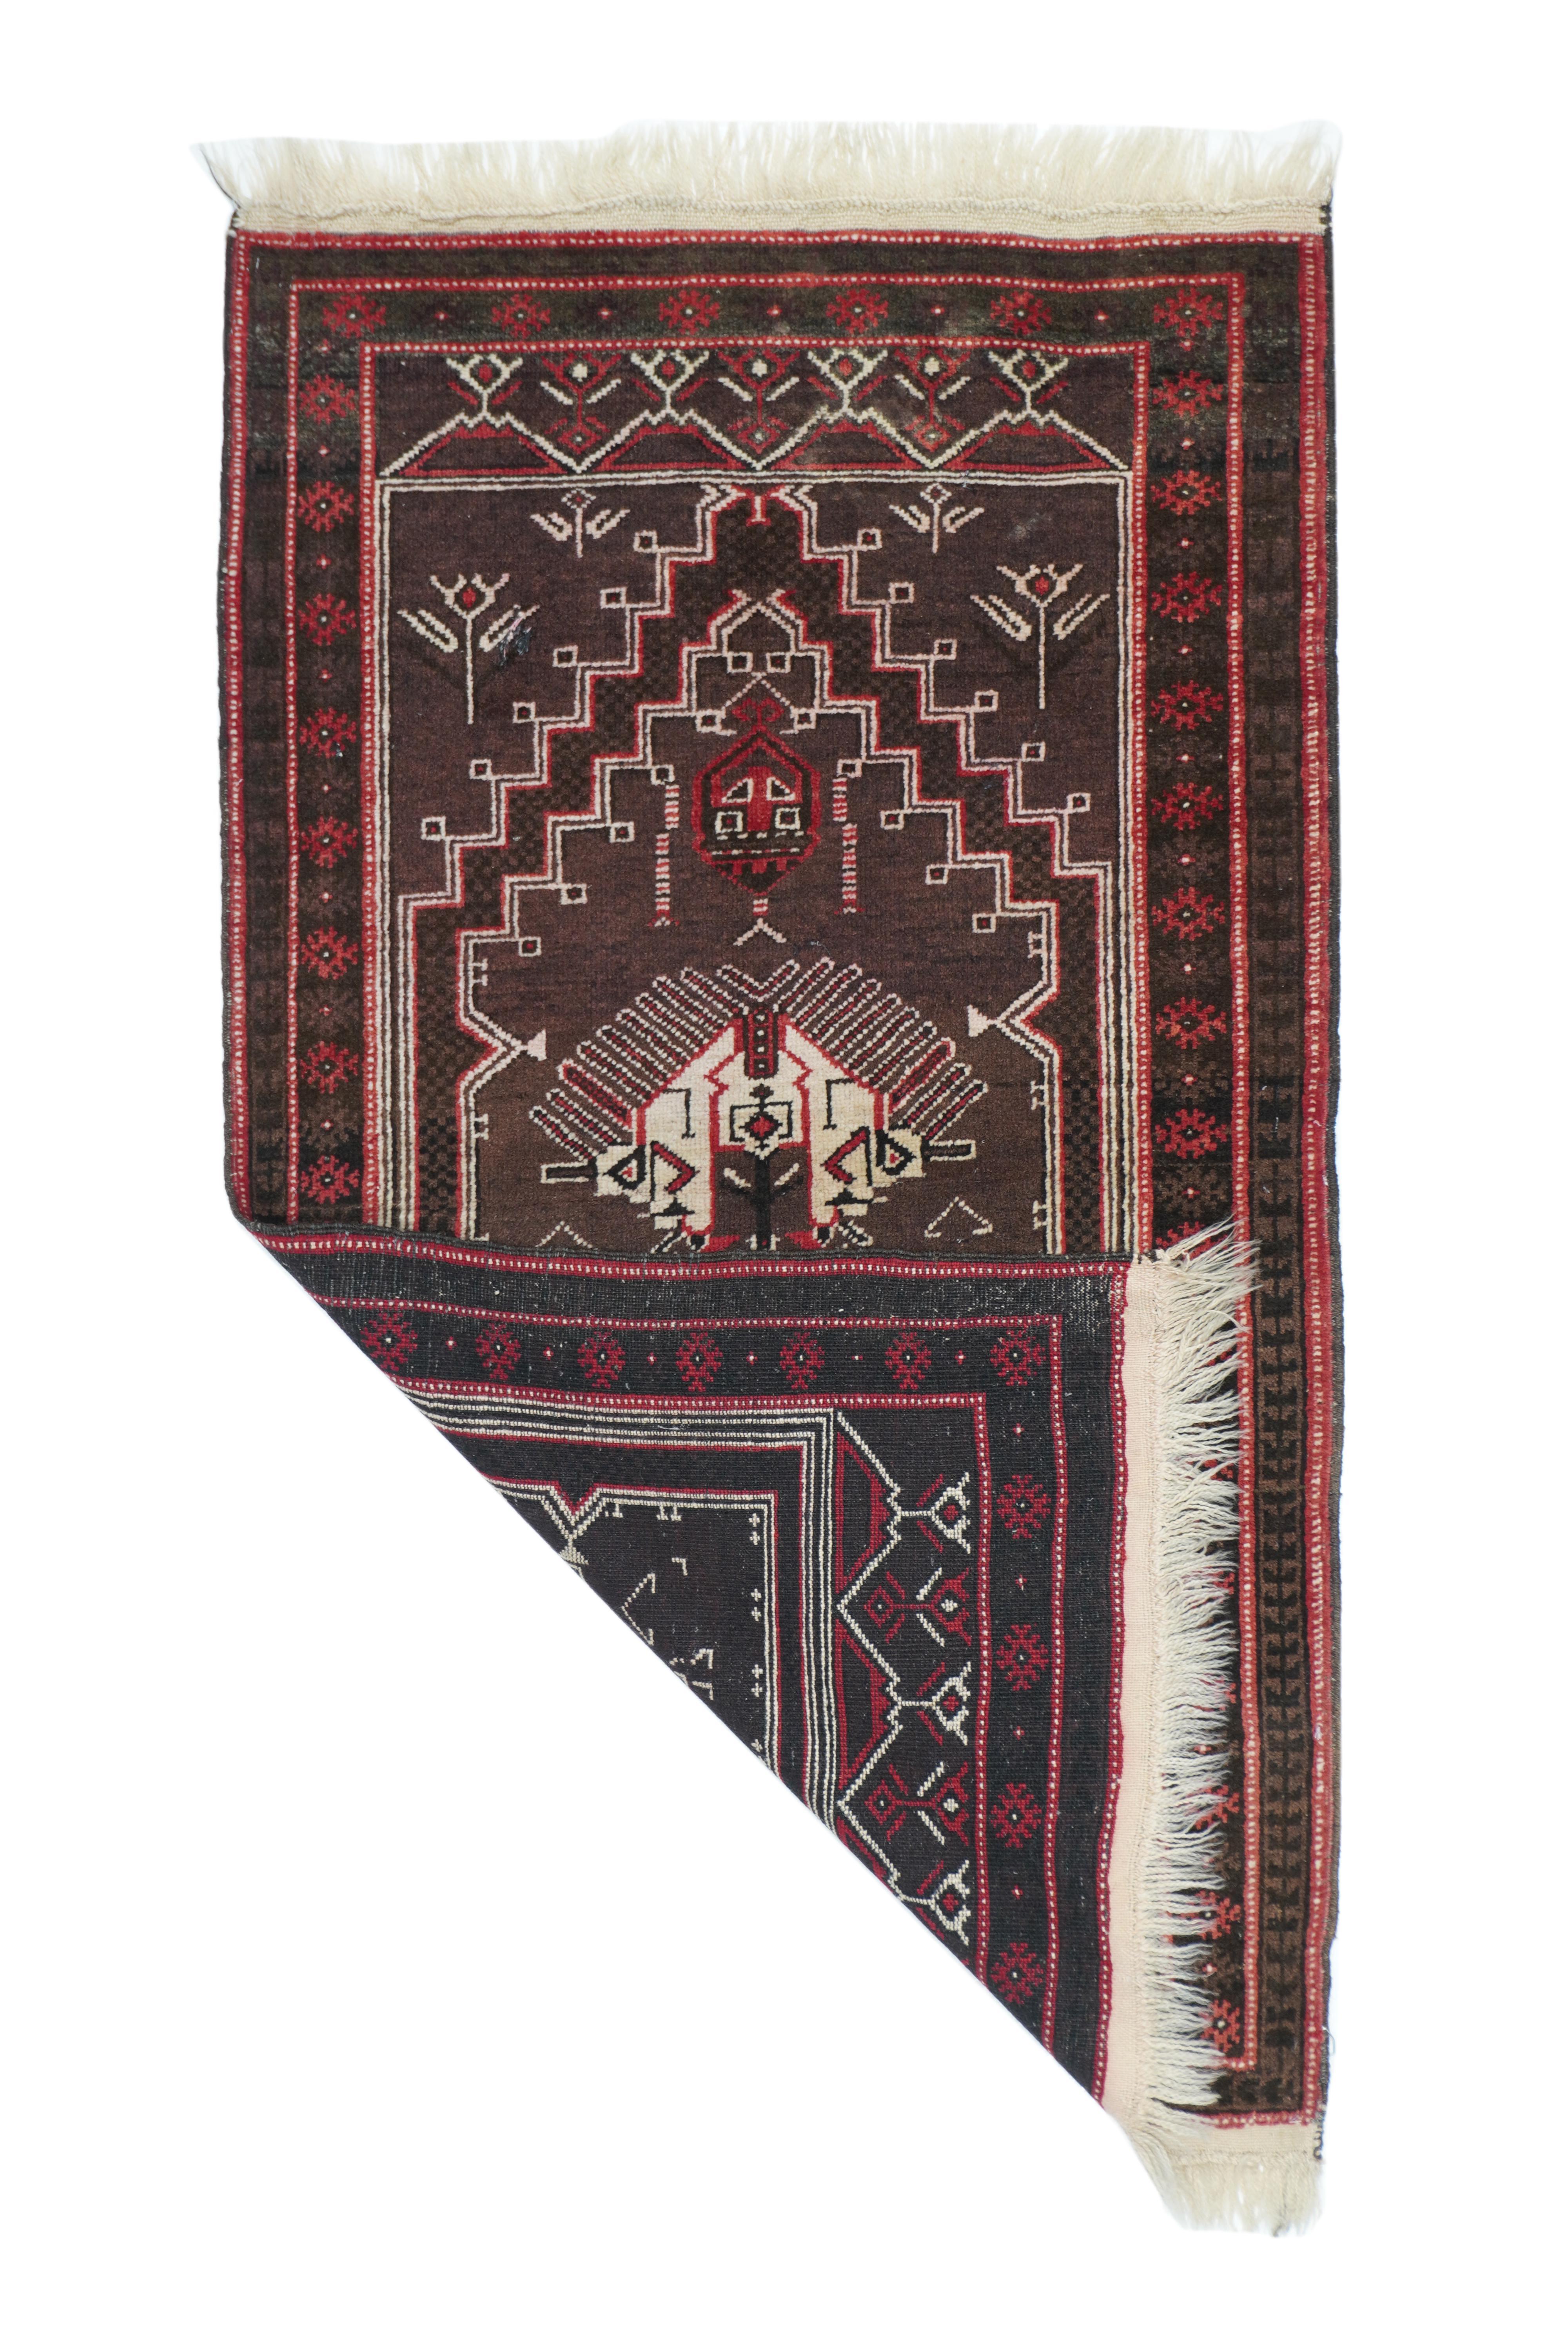 Creatively interpreting a central Turkish style with a stepped wine red floating niche, on a dark blue stepped field, with flowering spandrels and a floral panel at each field end. Two large finger-fringed palmettes in the field are the most salient